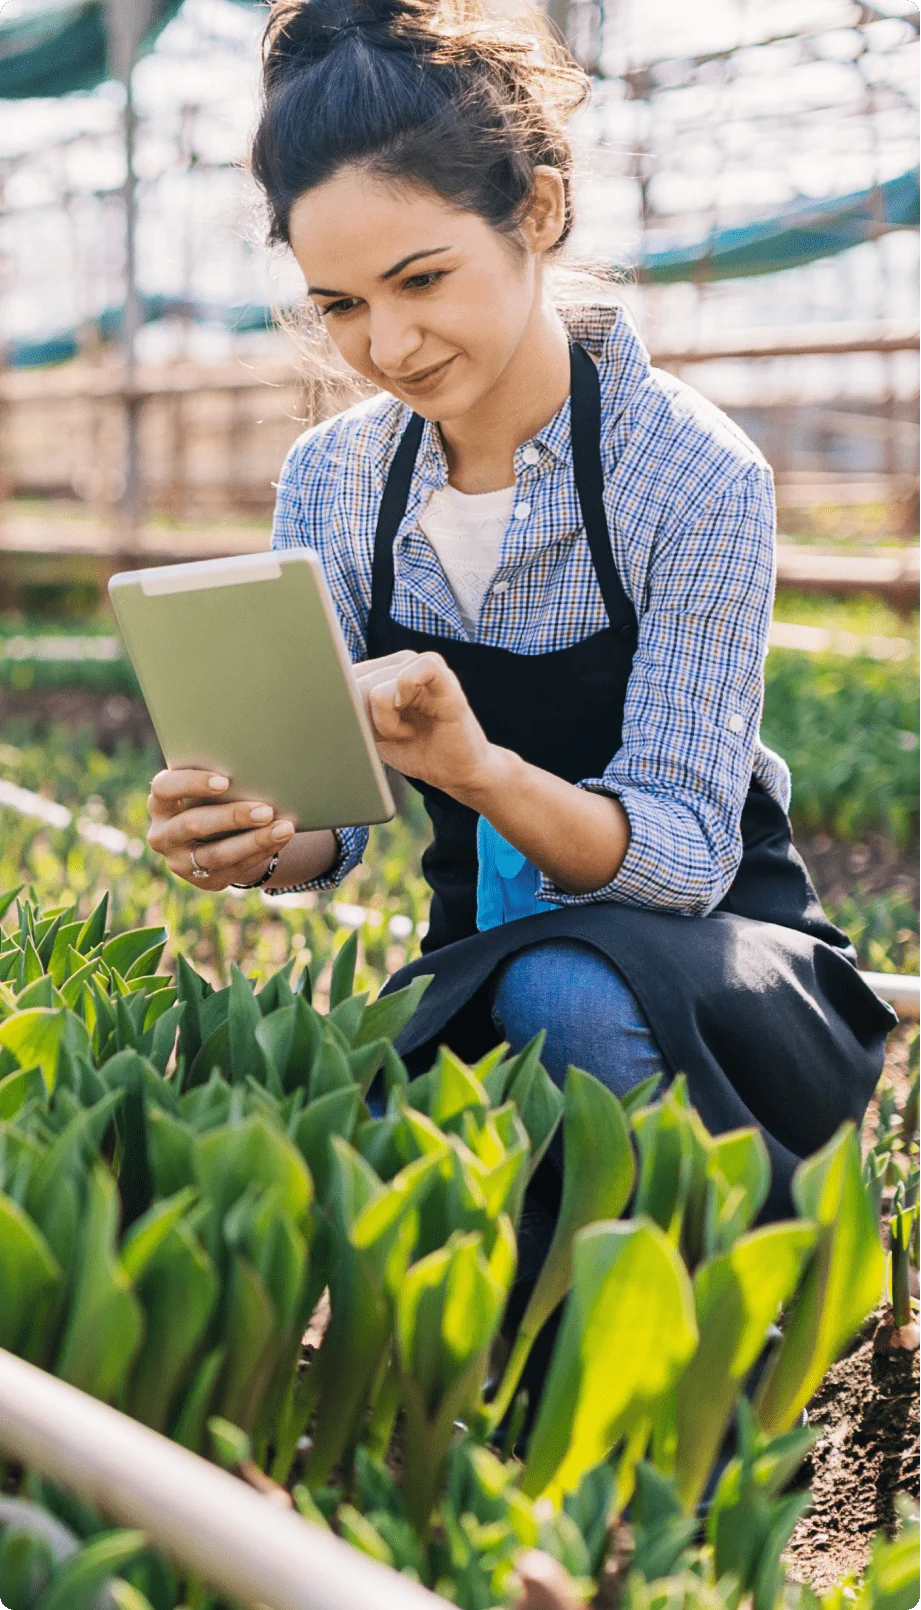 A woman viewing a tablet while working in a garden.